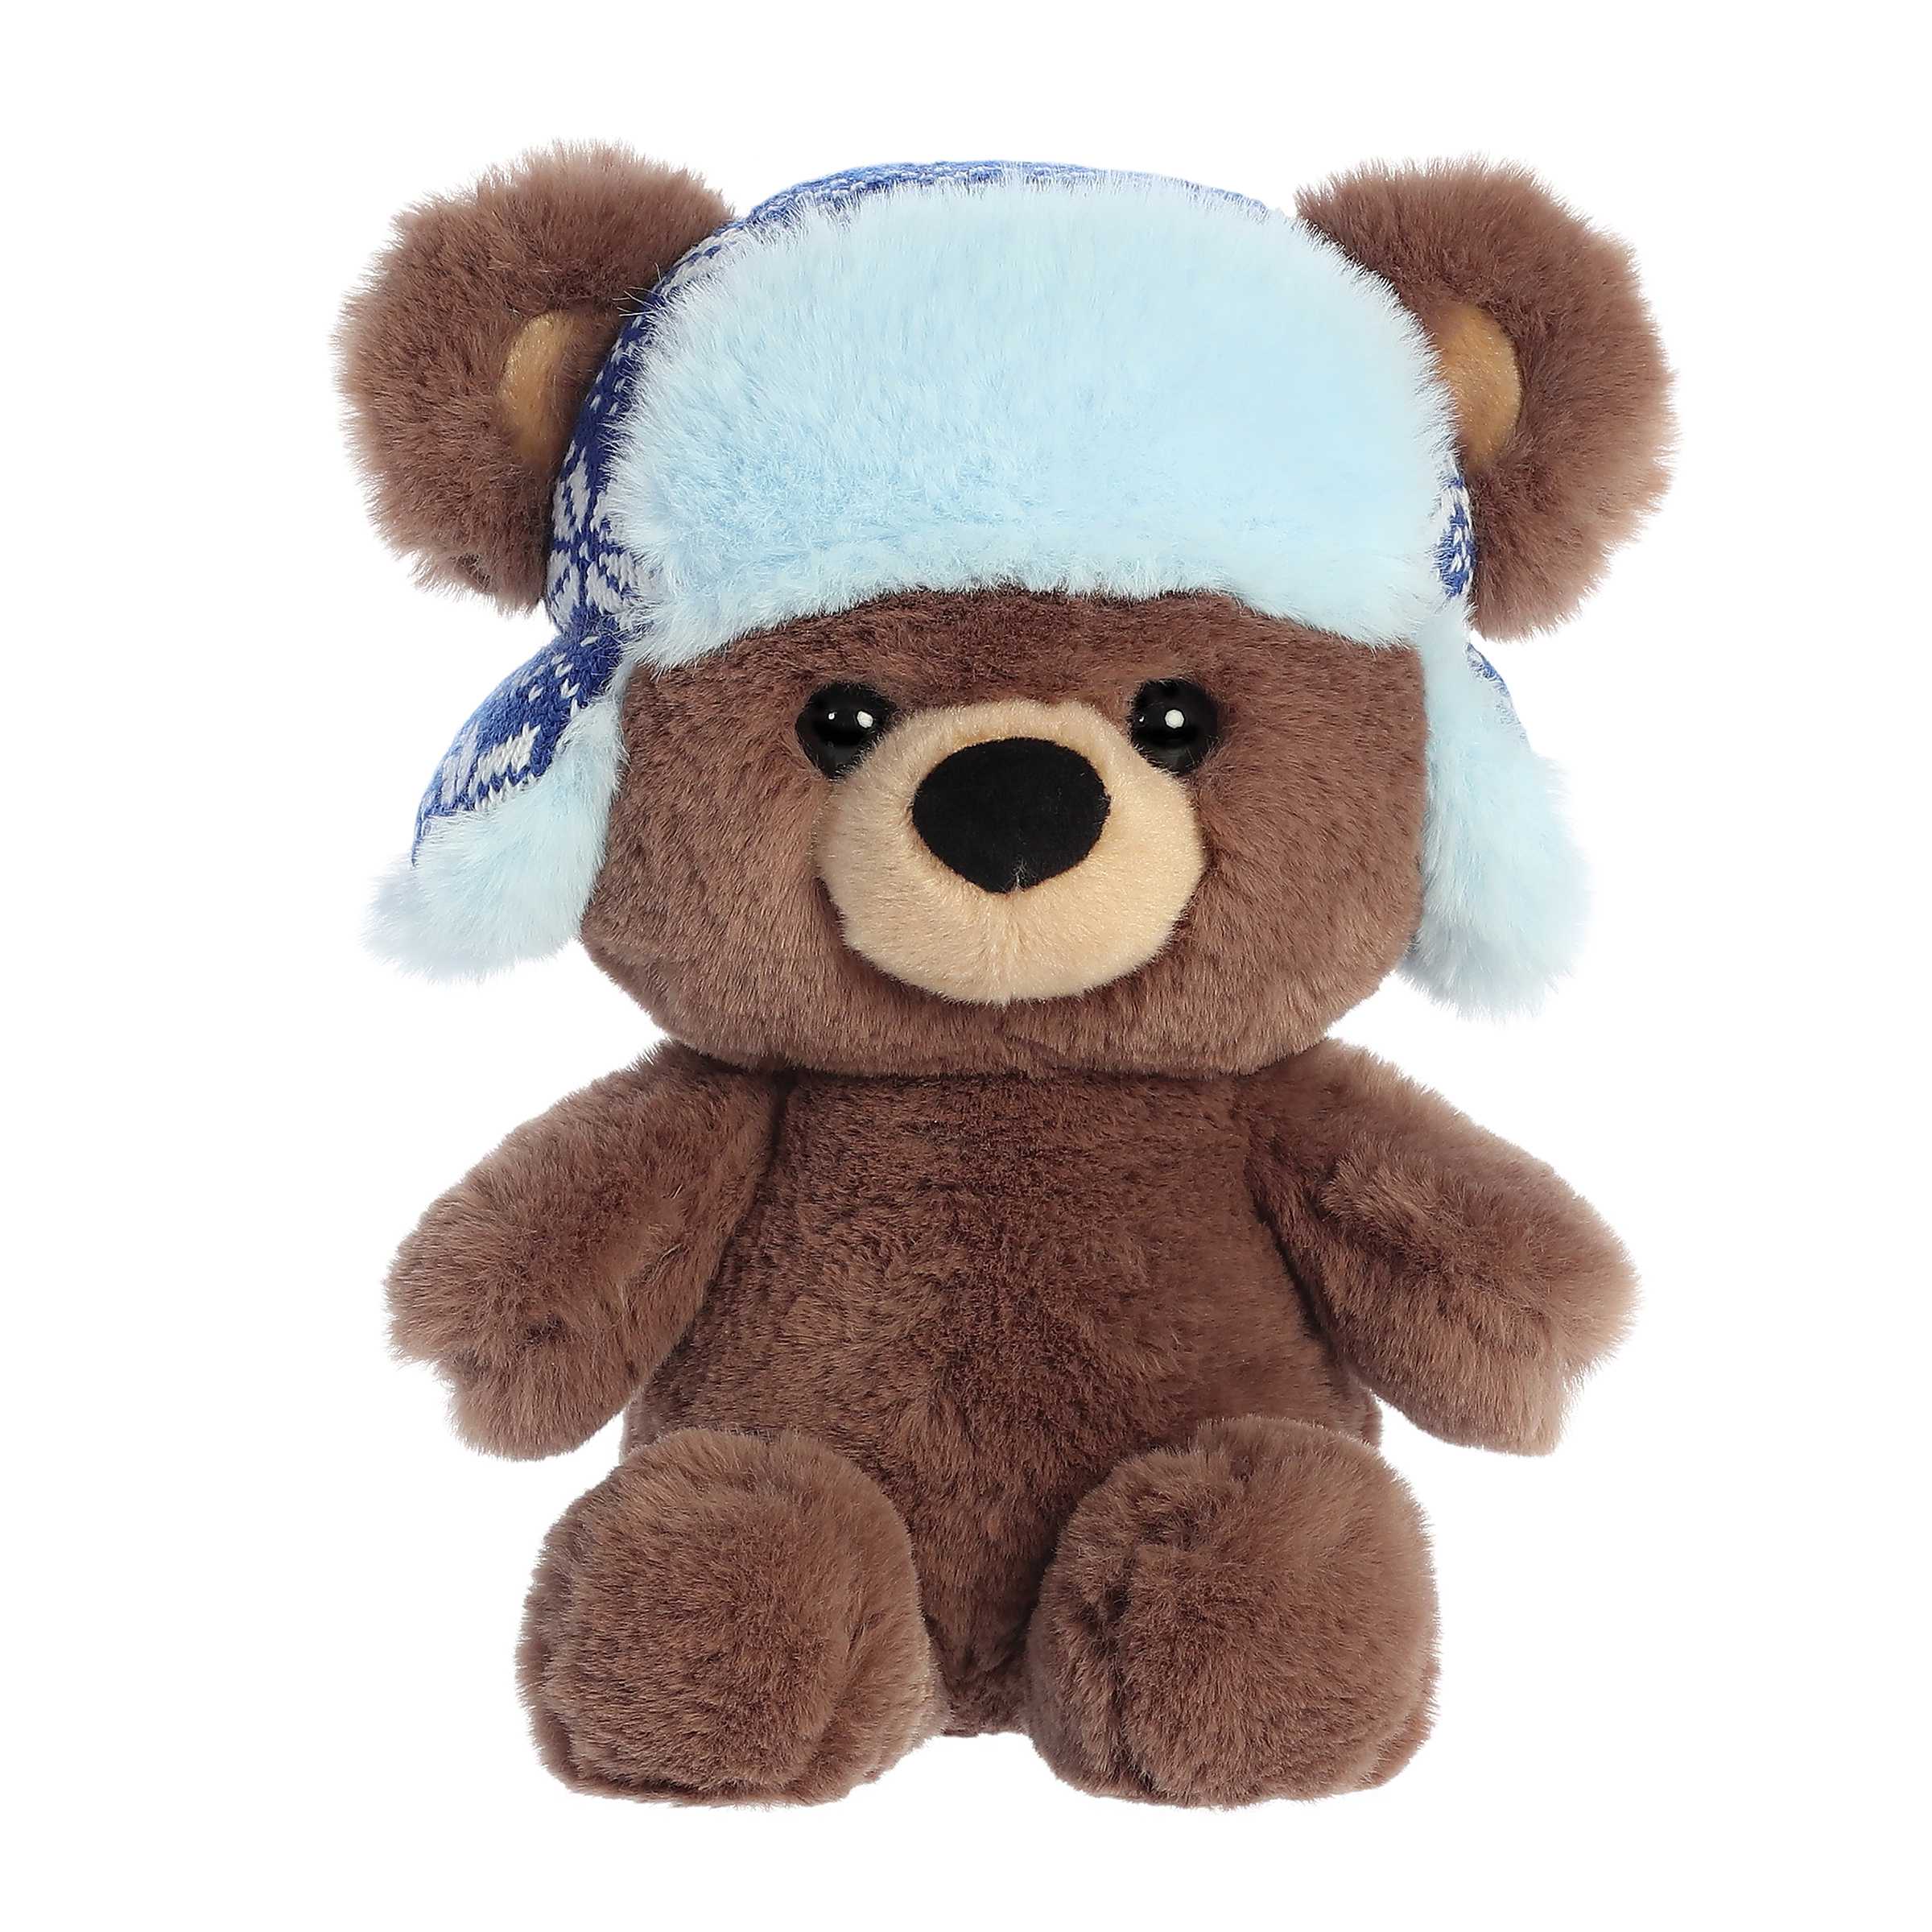 Sweet coffee-colored teddy bear with large head and big eyes, wearing a blue winter trapper hat